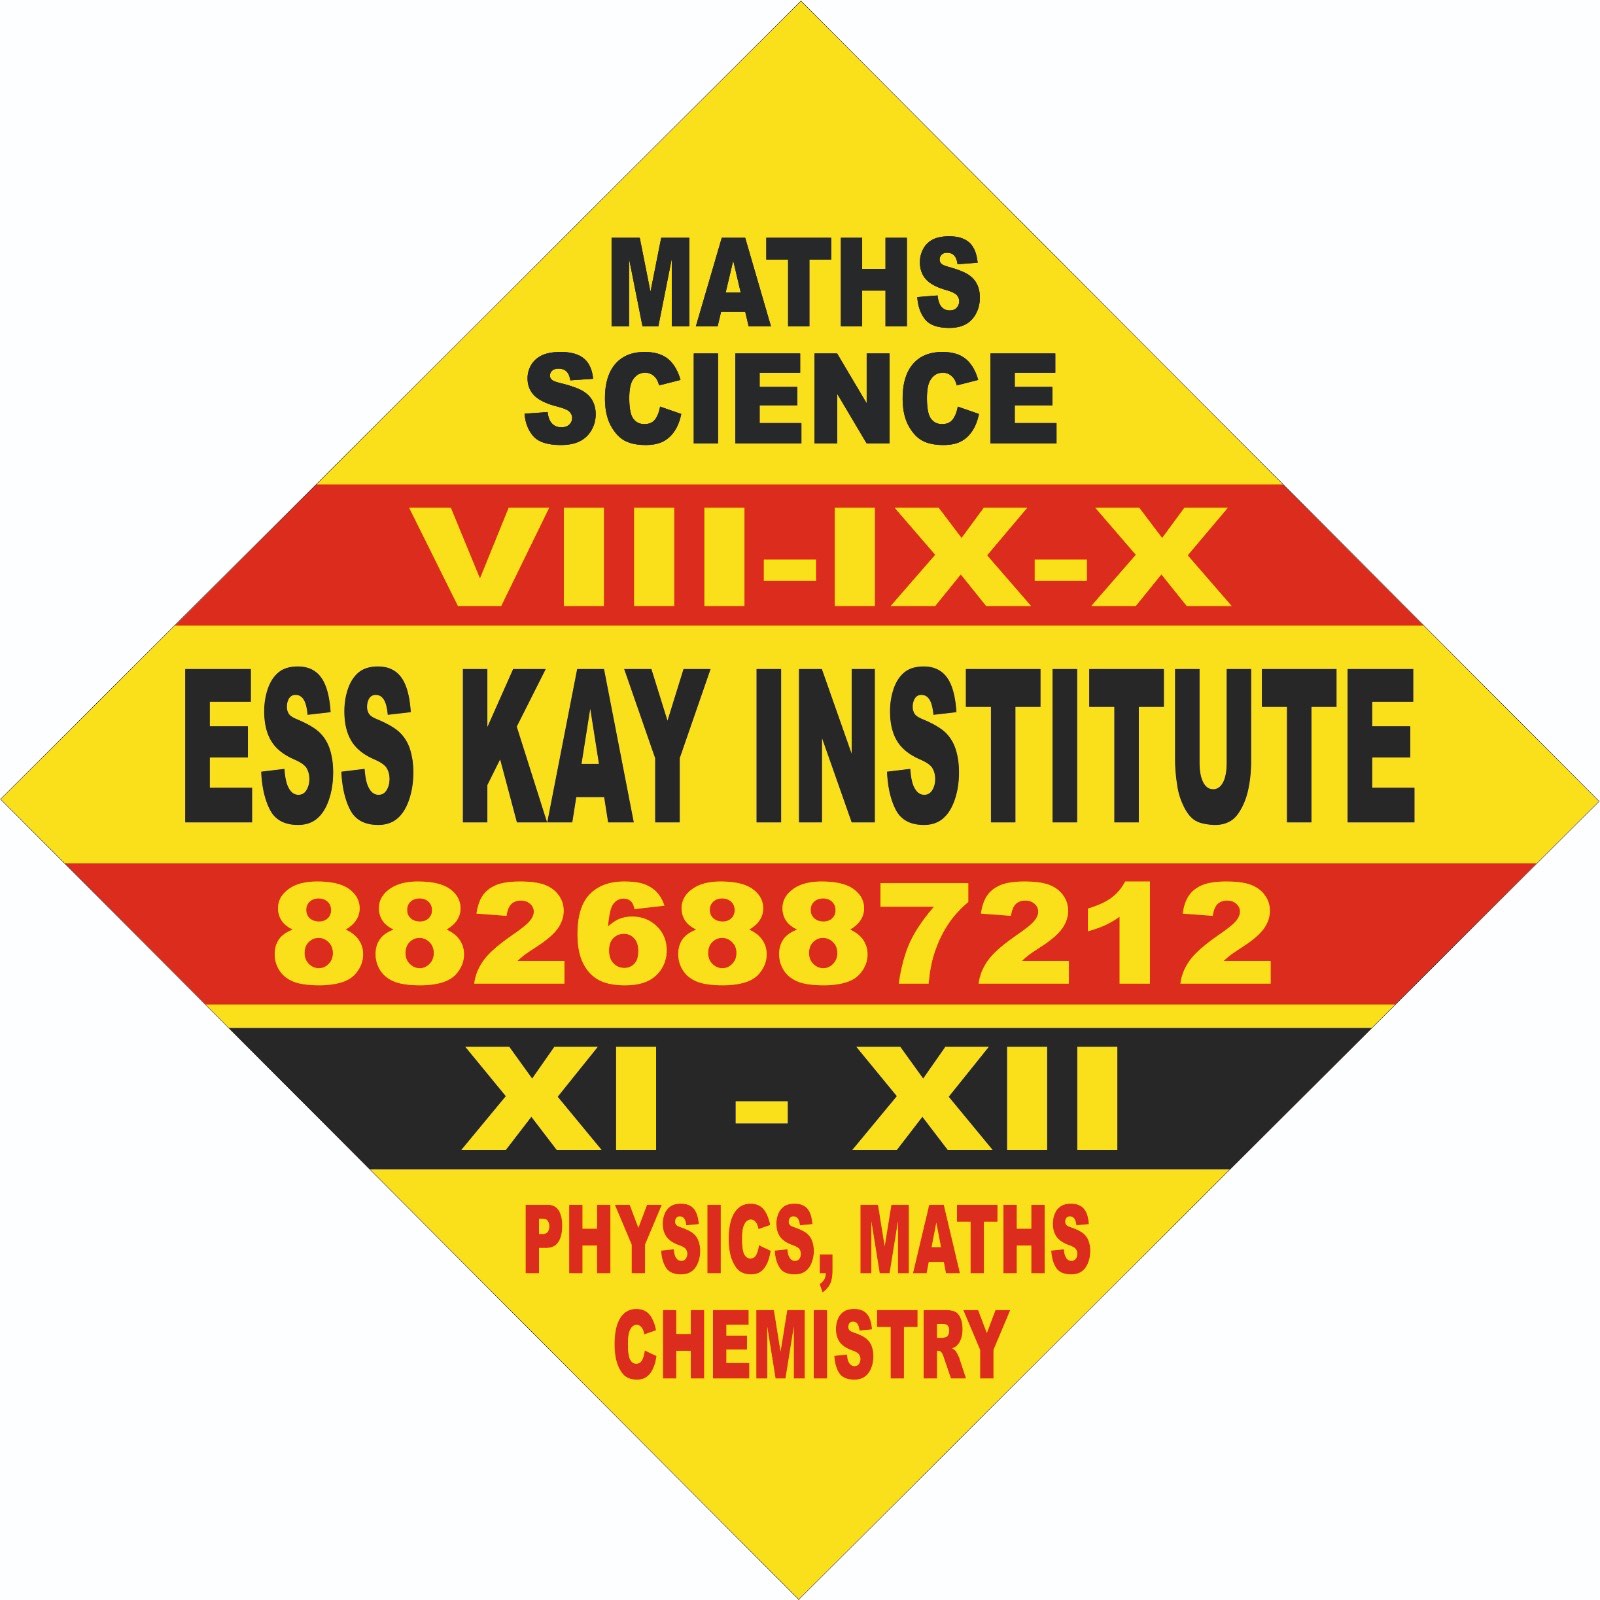 Chemistry, Class 11th/ 12th Tuition, Class 9th/ 10th Tuition, Mathematics, Physics; Exp: More than 15 year